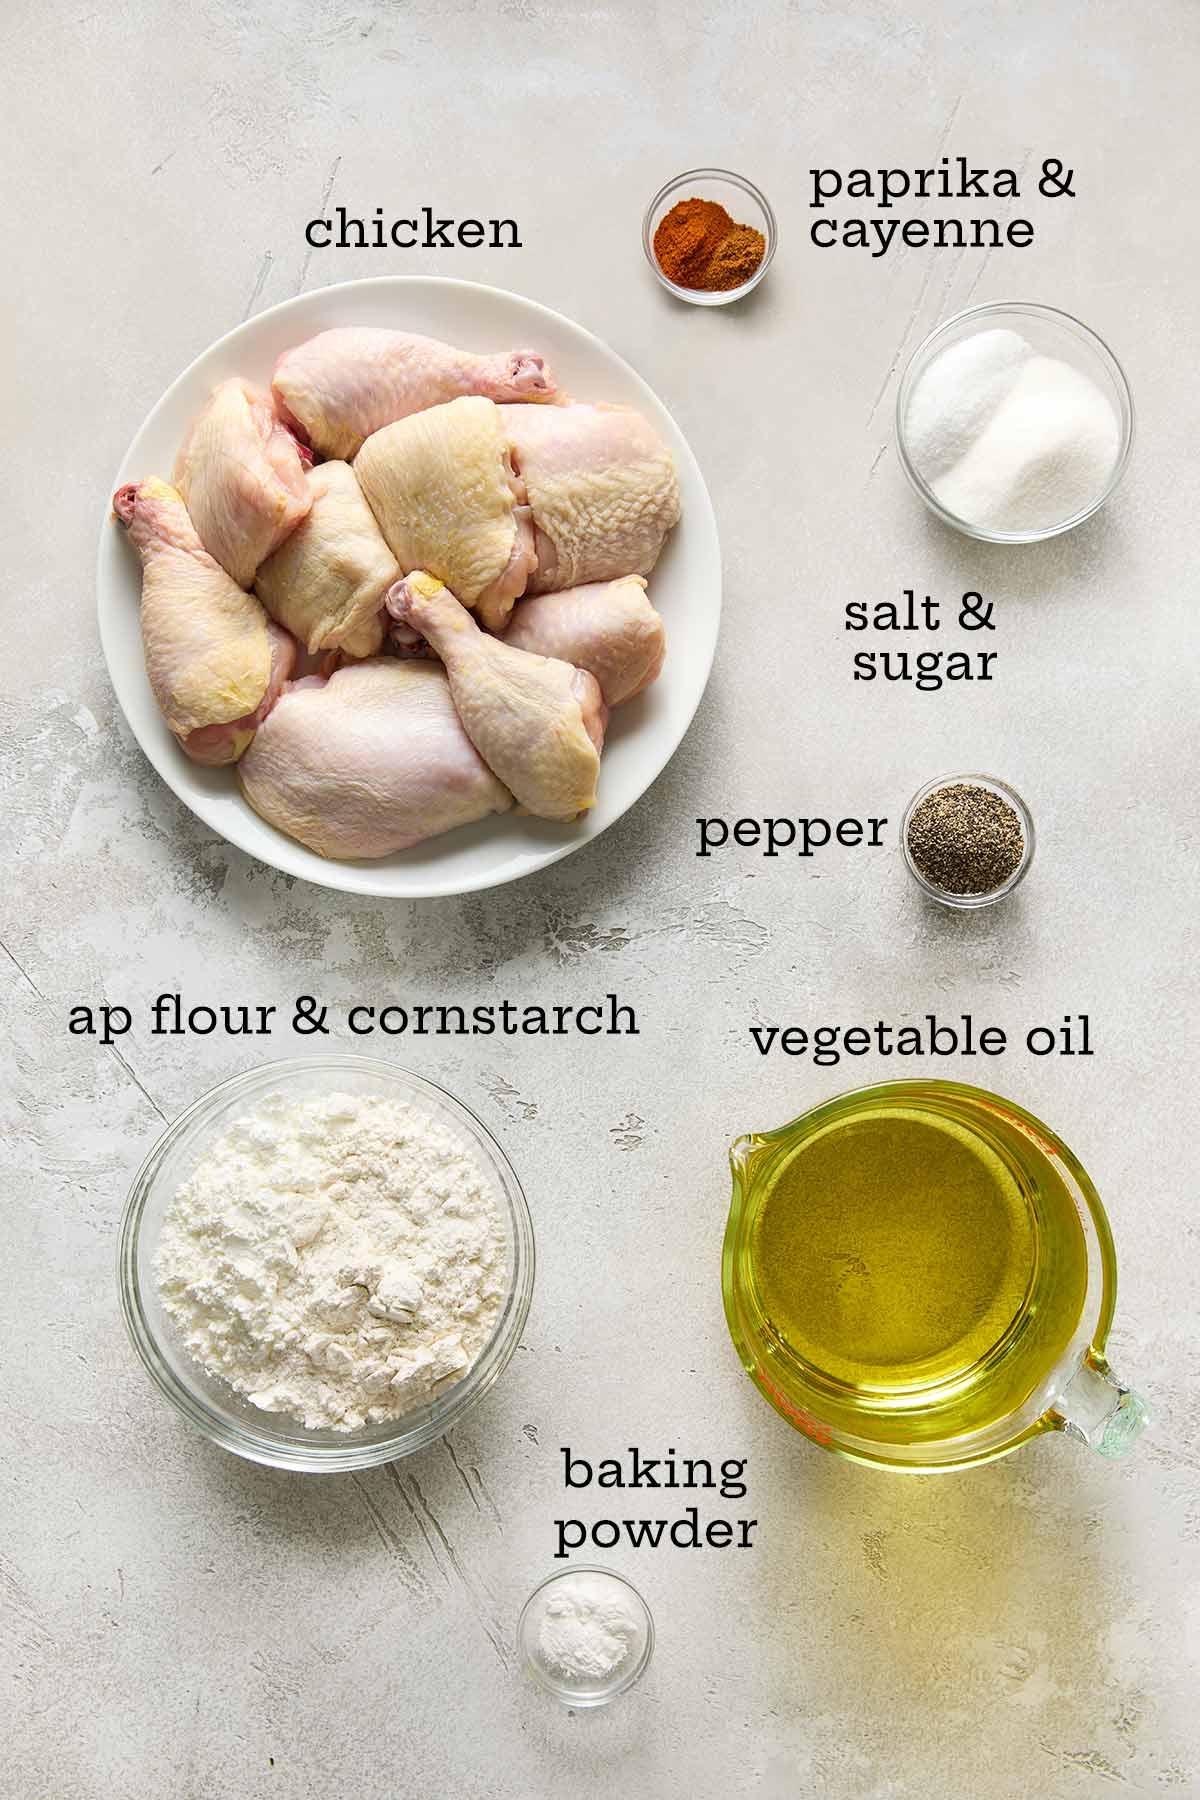 Ingredients for batter-fried chicken--chicken pieces, spices, sugar and salt, flour and cornstarch, baking powder, and oil.